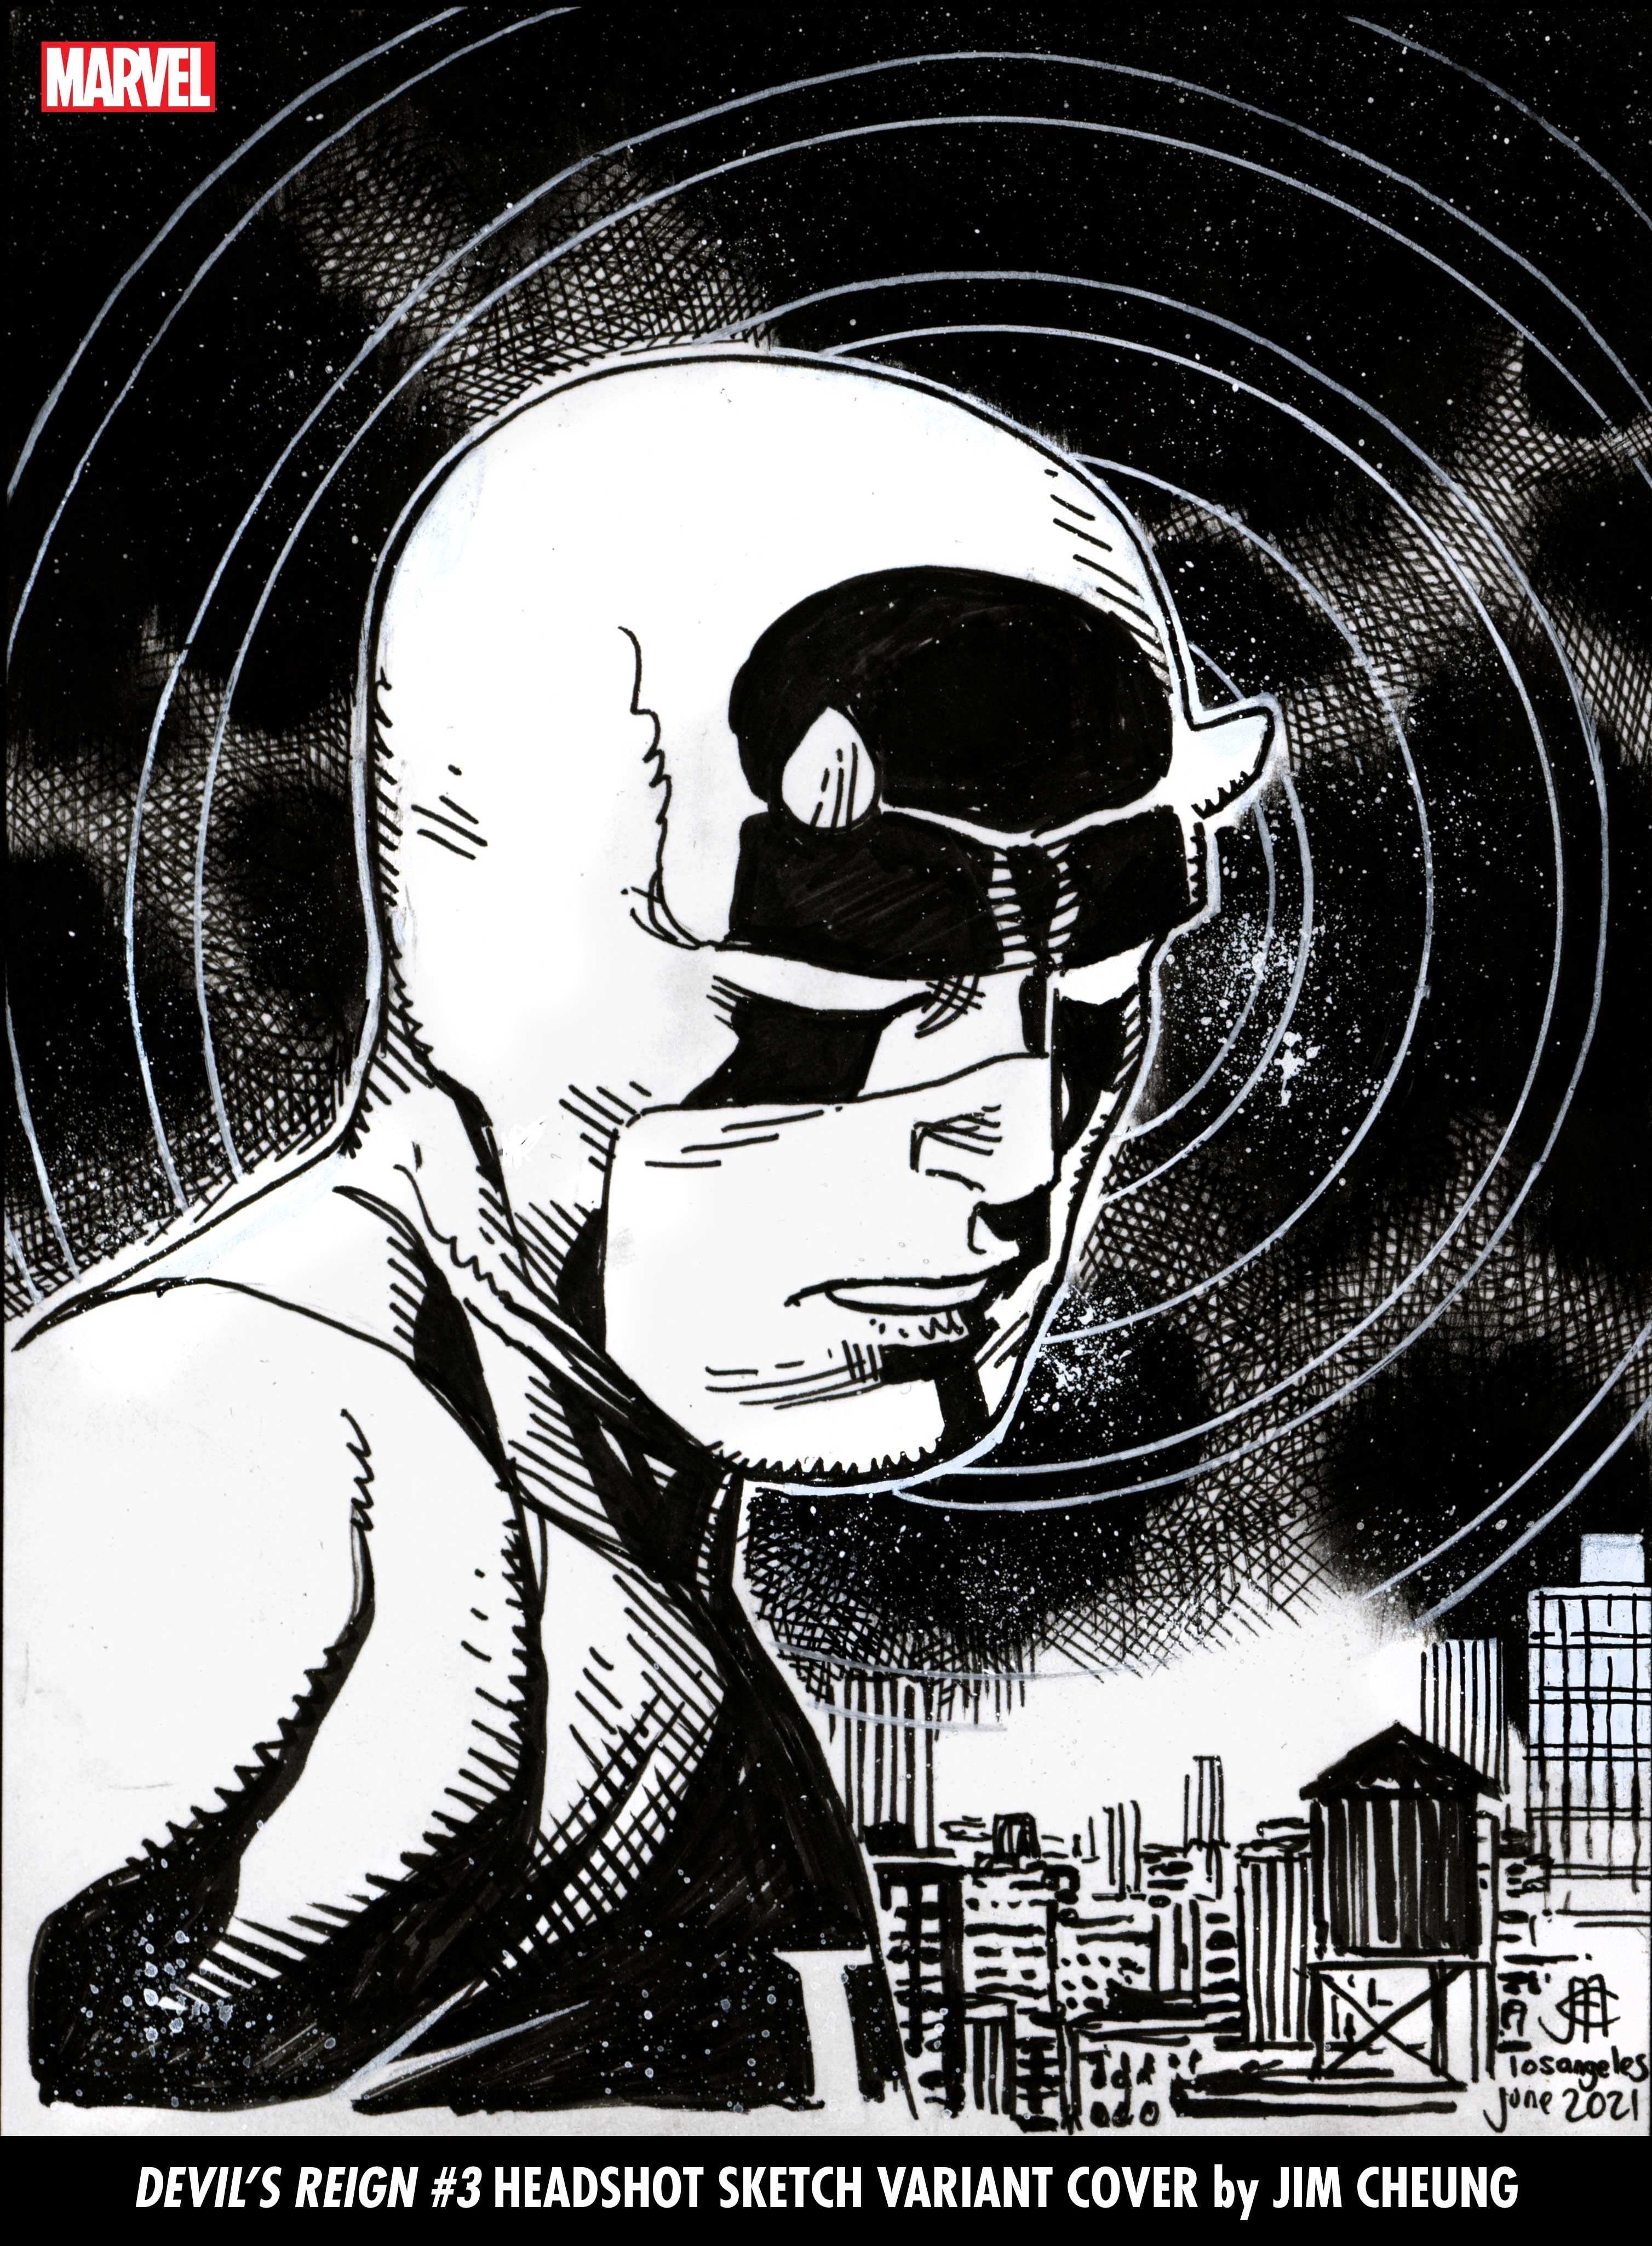 Black and white headshot cover of Daredevil by Jim Cheung